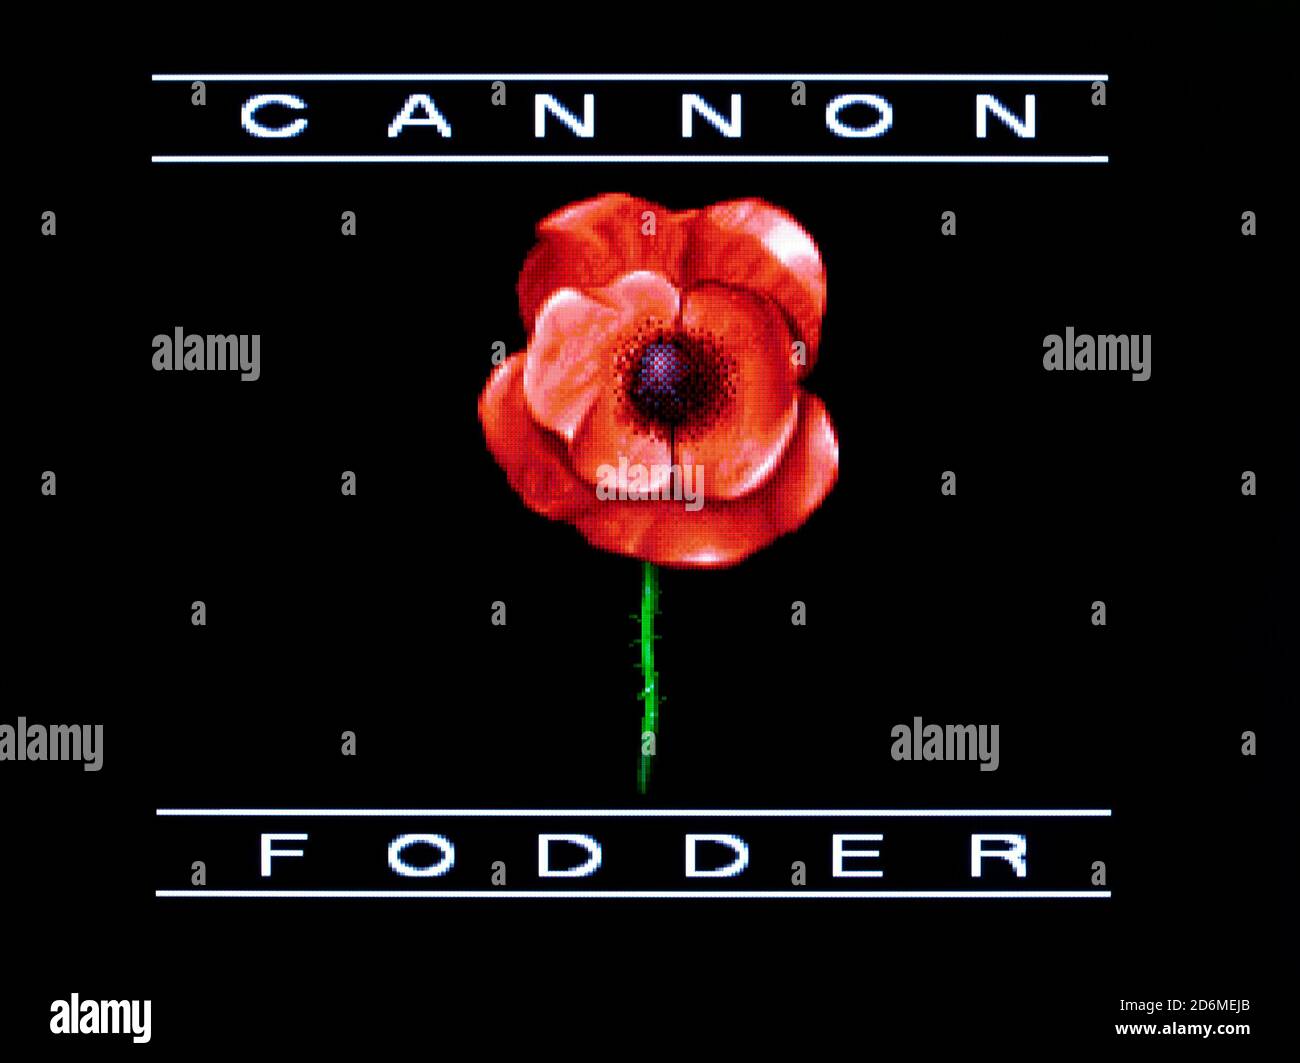 Cannon Fodder - 3DO Interactive Multiplayer Videogame - Editorial Use Only Stock Photo